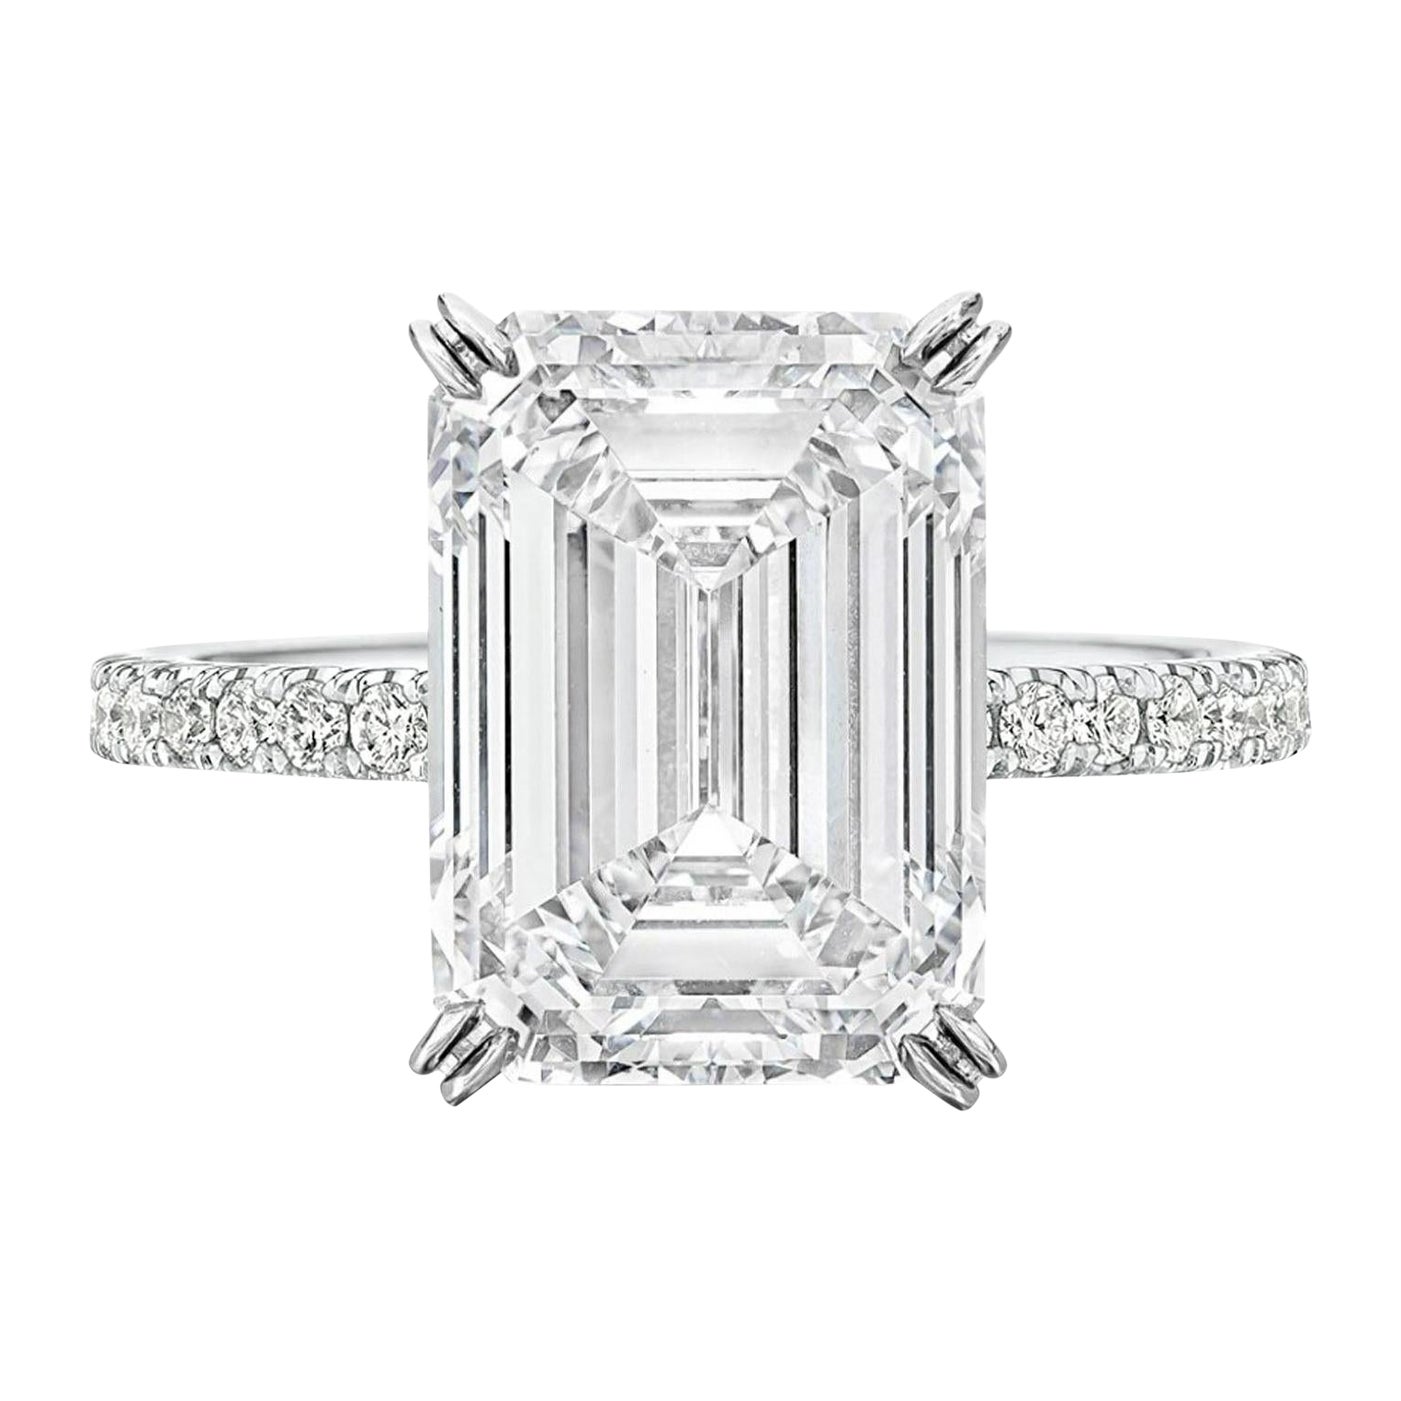 GIA Certified 5 Carat Diamond D COLOR FLAWLESS Clarity Ring